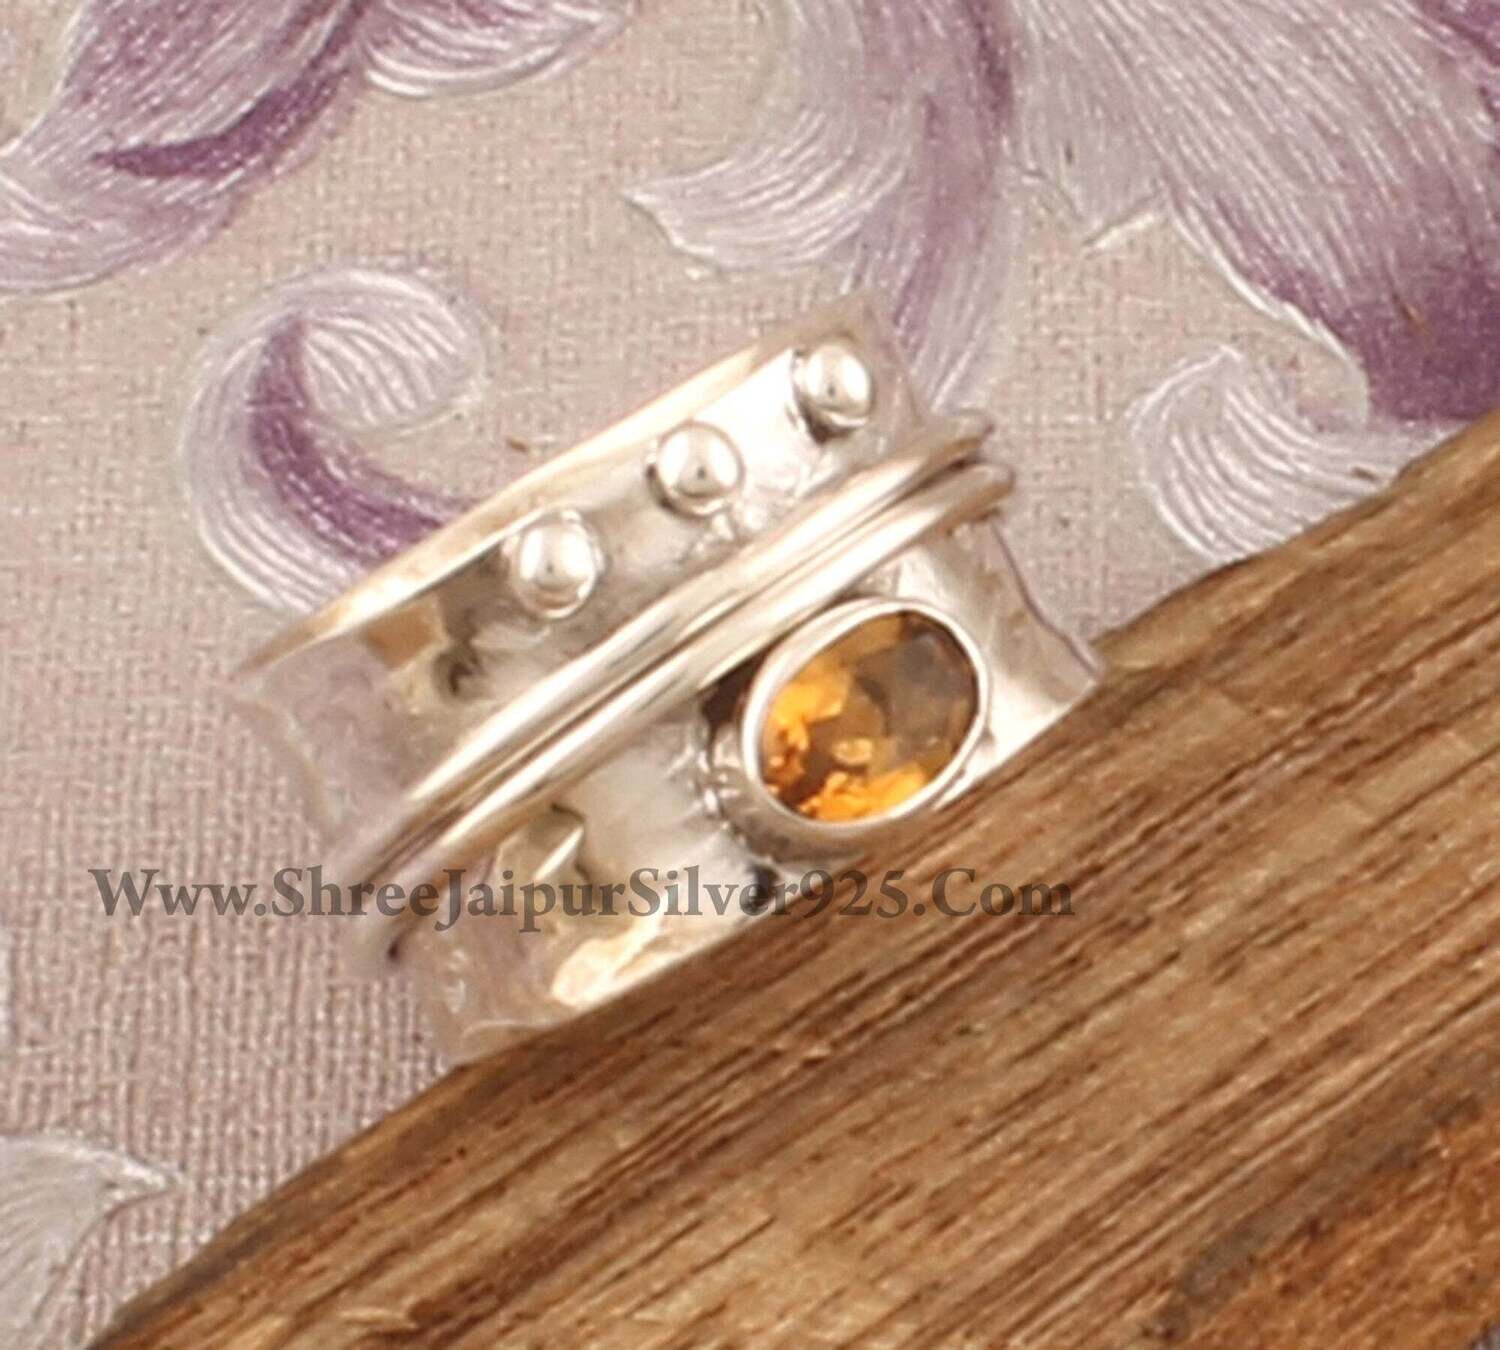 Natural Citrine Solid 925 Sterling Silver Spinner Ring For Women, Handmade Oval Meditation Wedding Ring Boho Worry Anxiety Ring Gift For Her